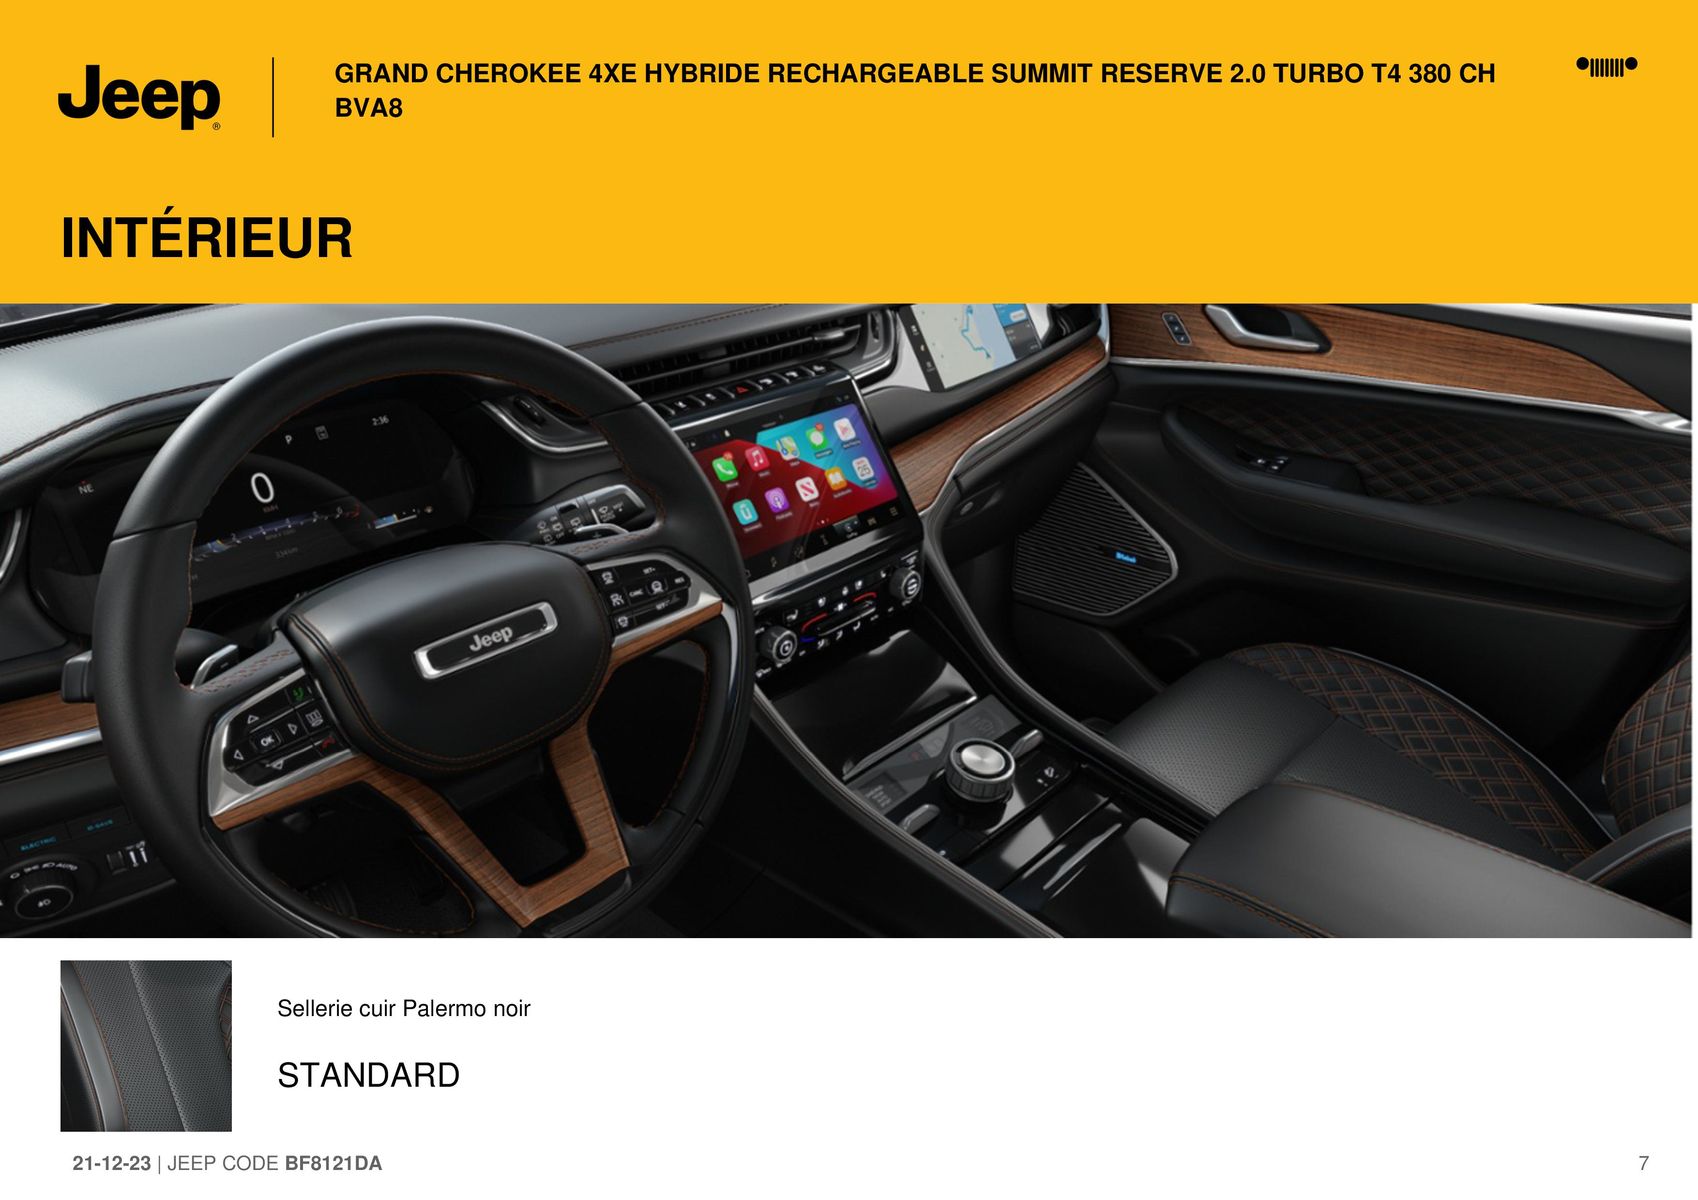 Catalogue GRAND CHEROKEE 4XE HYBRIDE RECHARGEABLE SUMMIT RESERVE 2.0 TURBO T4 380 CH BVA8_, page 00007